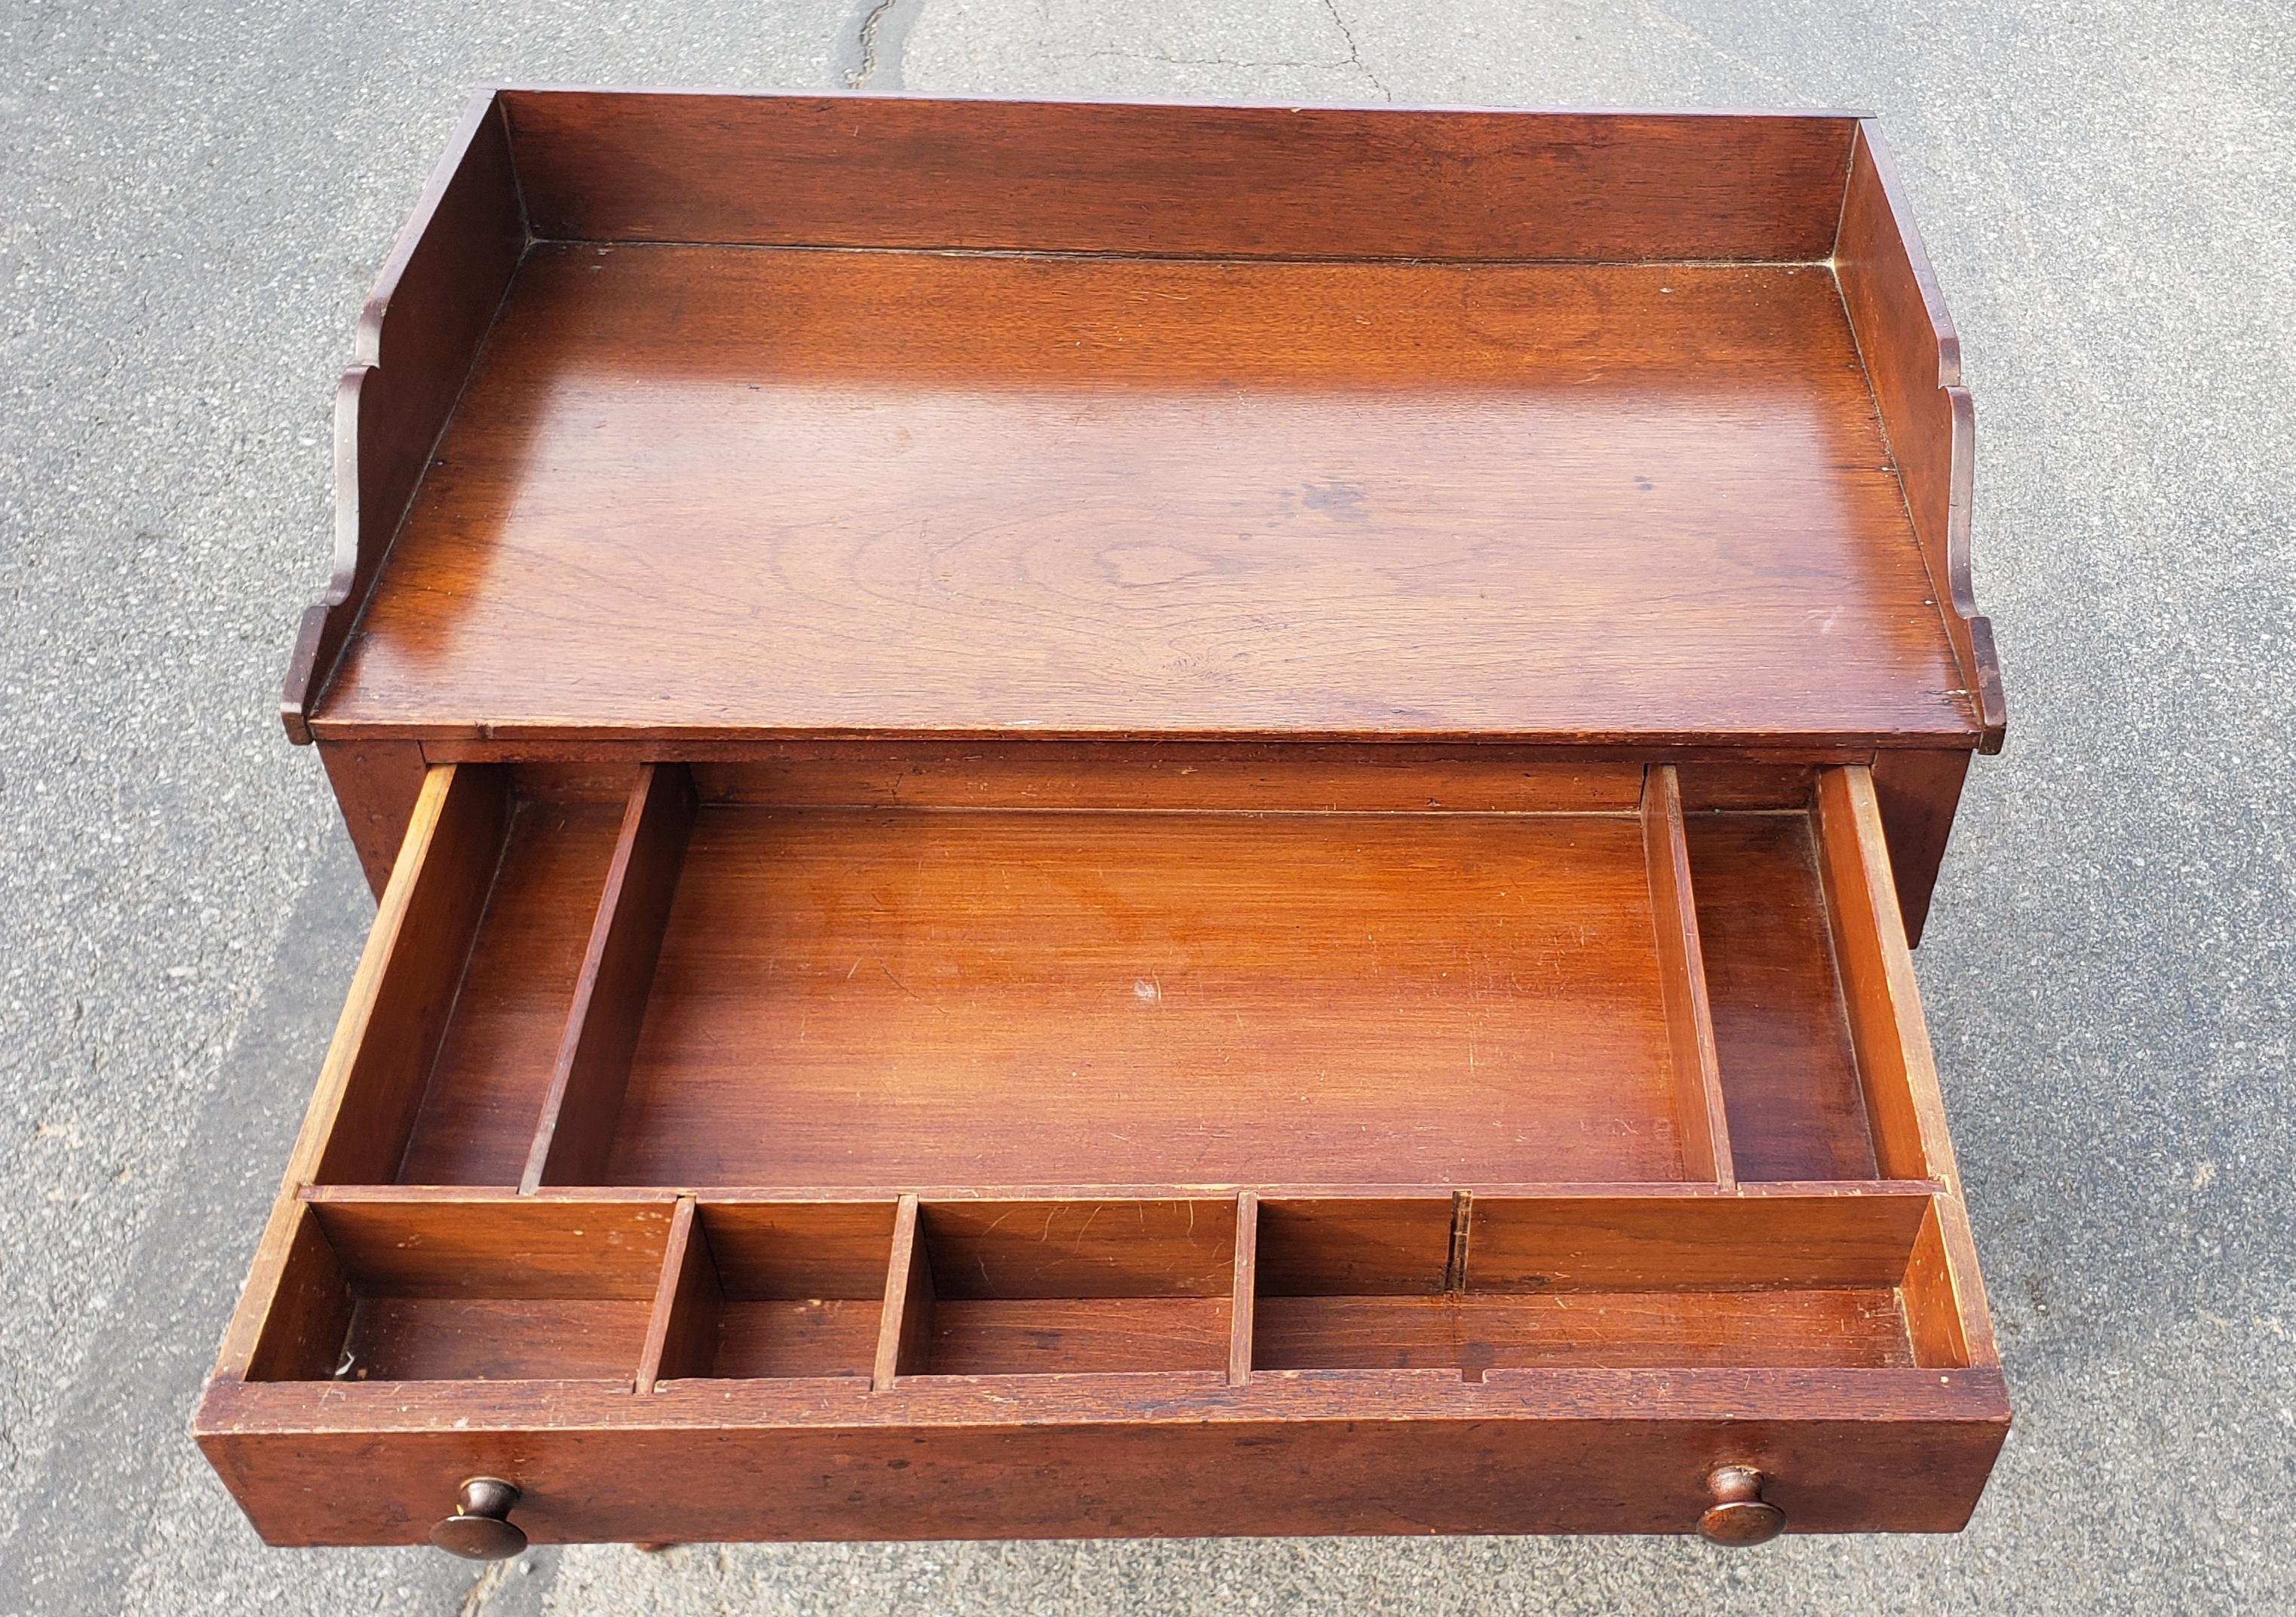 Hand-Crafted 19th Century Walnut Tiered Washstand or Work Table with Drawer and Open Storage For Sale